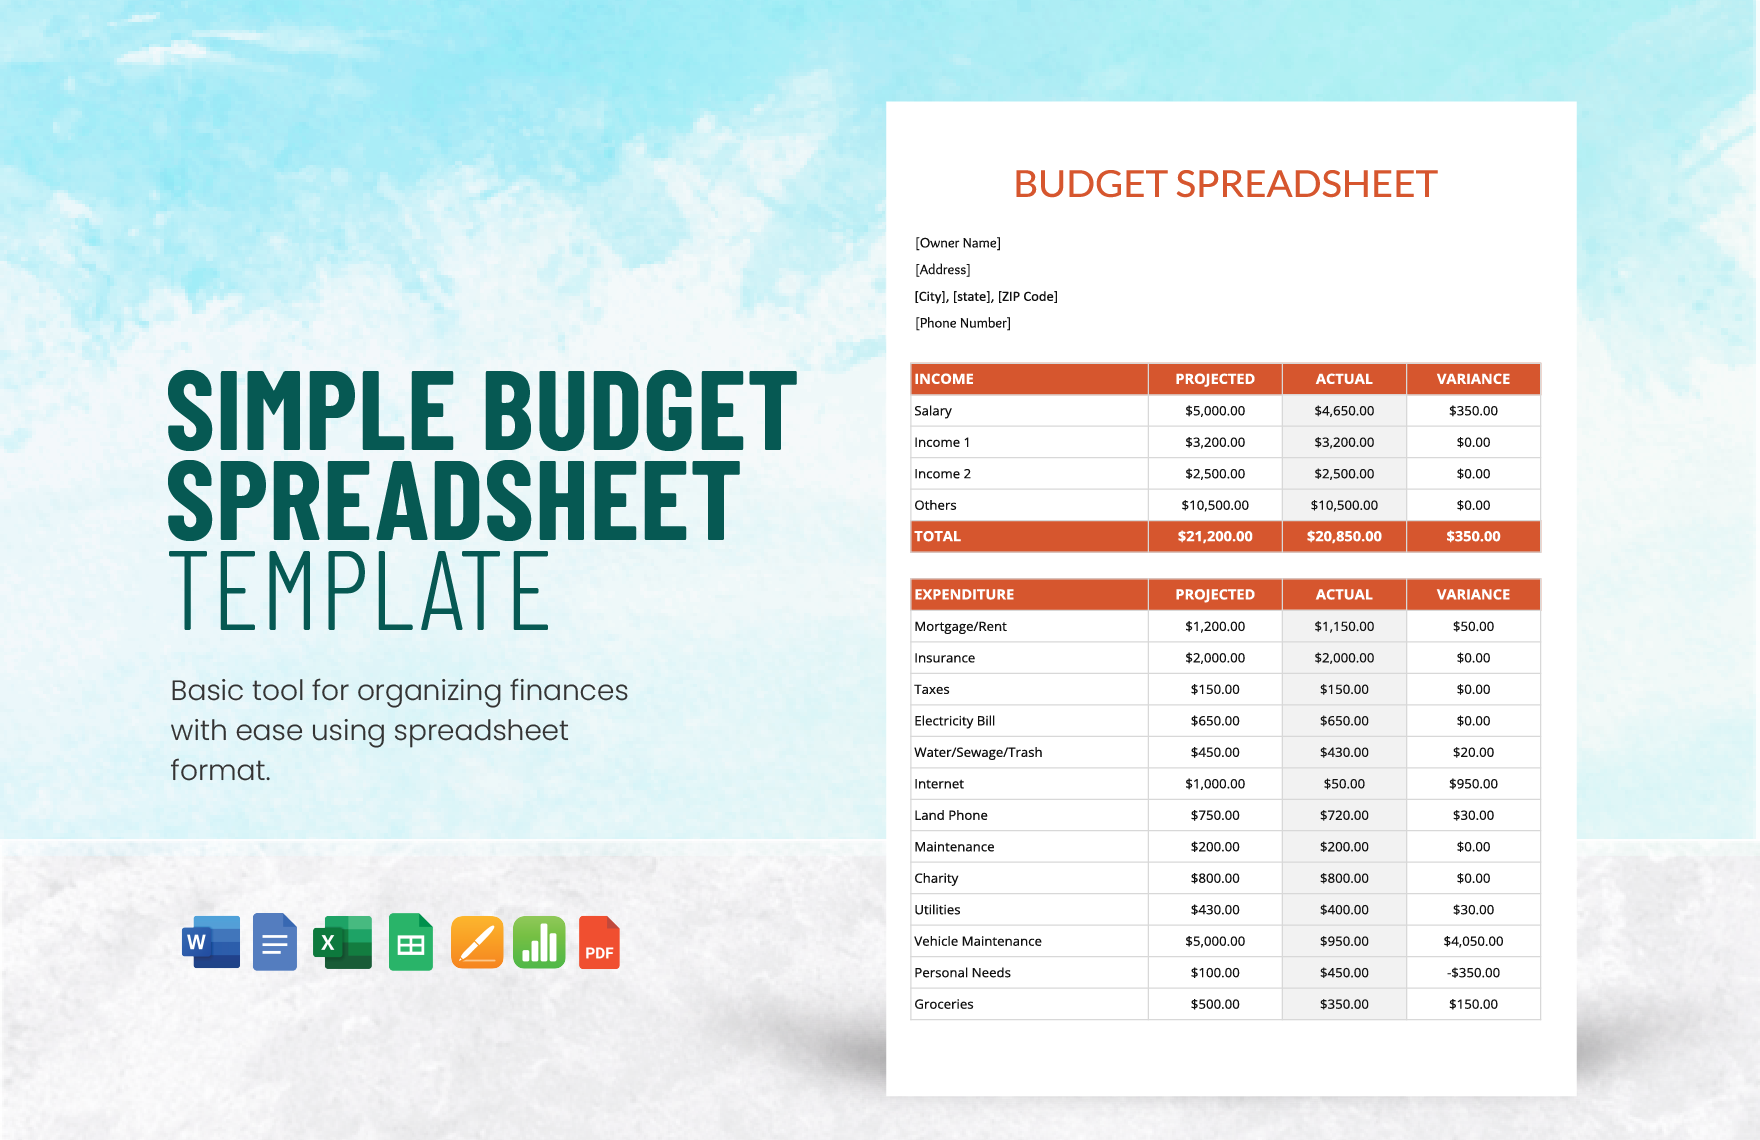 Simple Budget Spreadsheet Template in Word, Google Docs, Excel, PDF, Google Sheets, Apple Pages, Apple Numbers